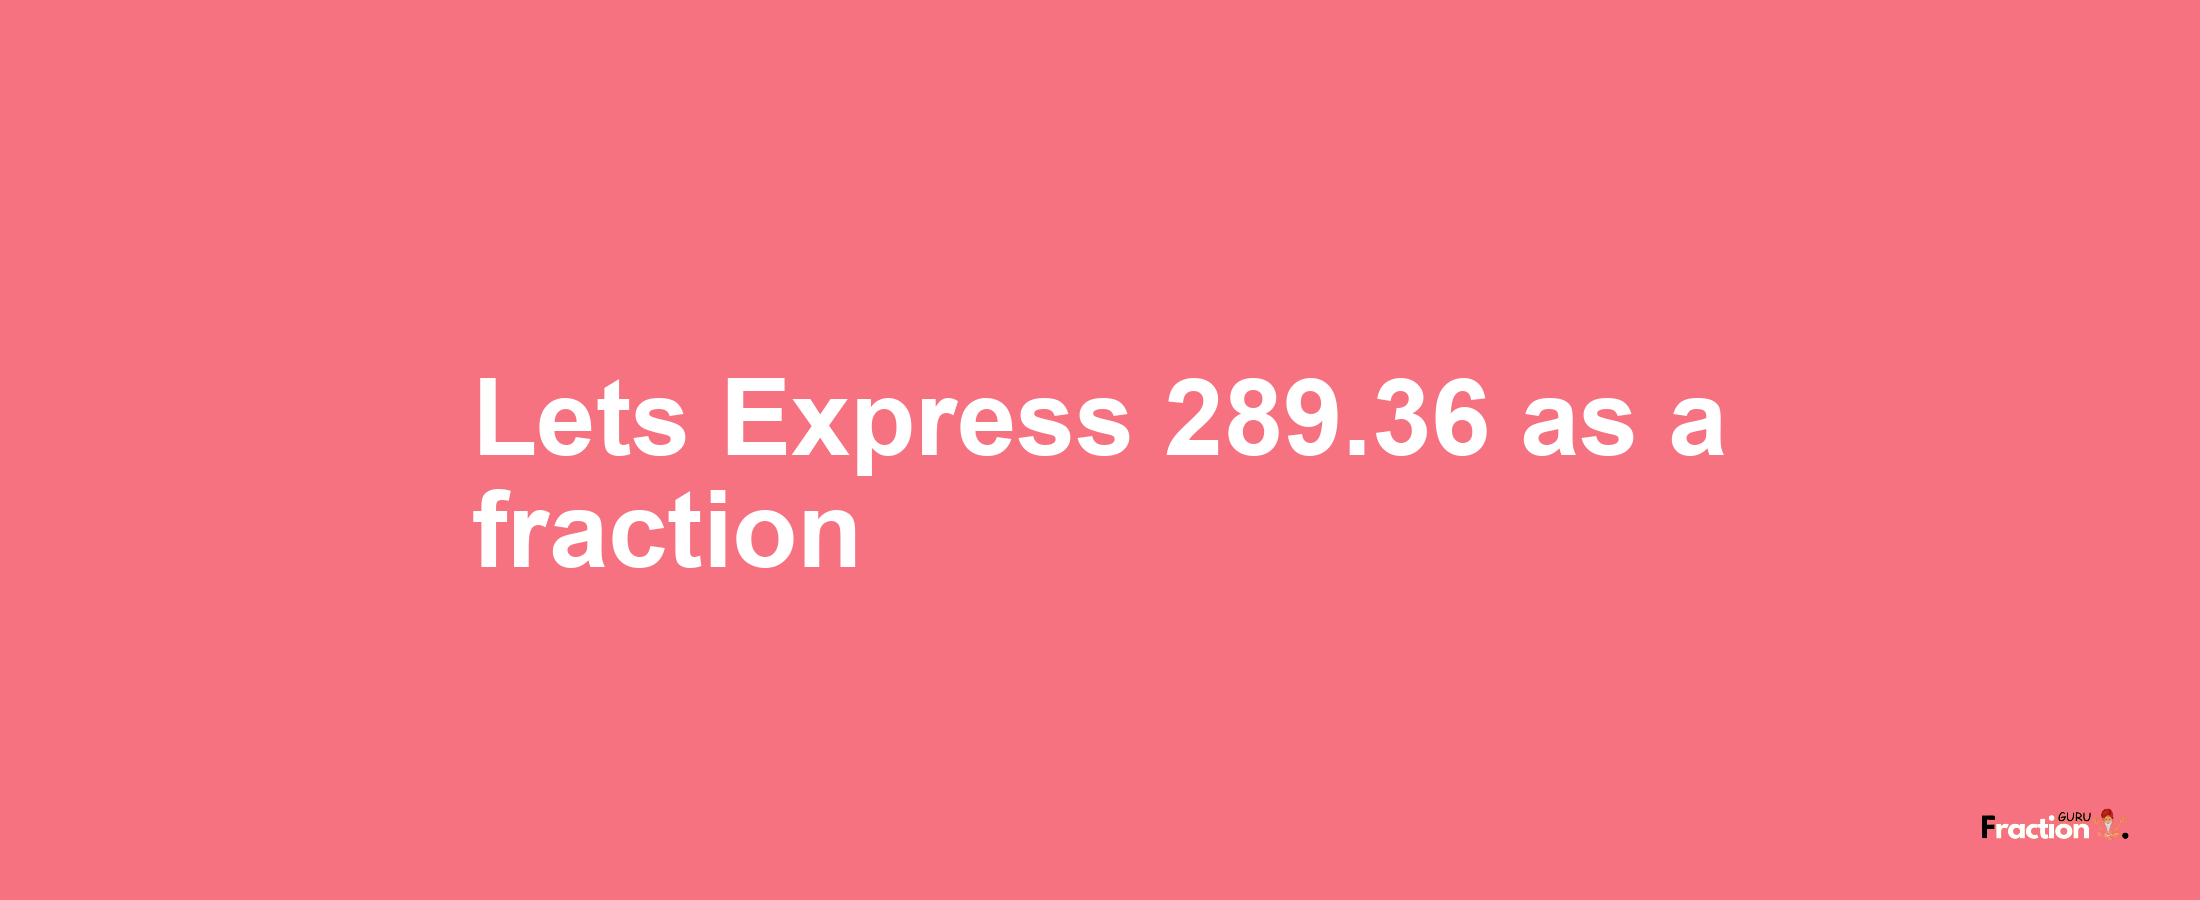 Lets Express 289.36 as afraction